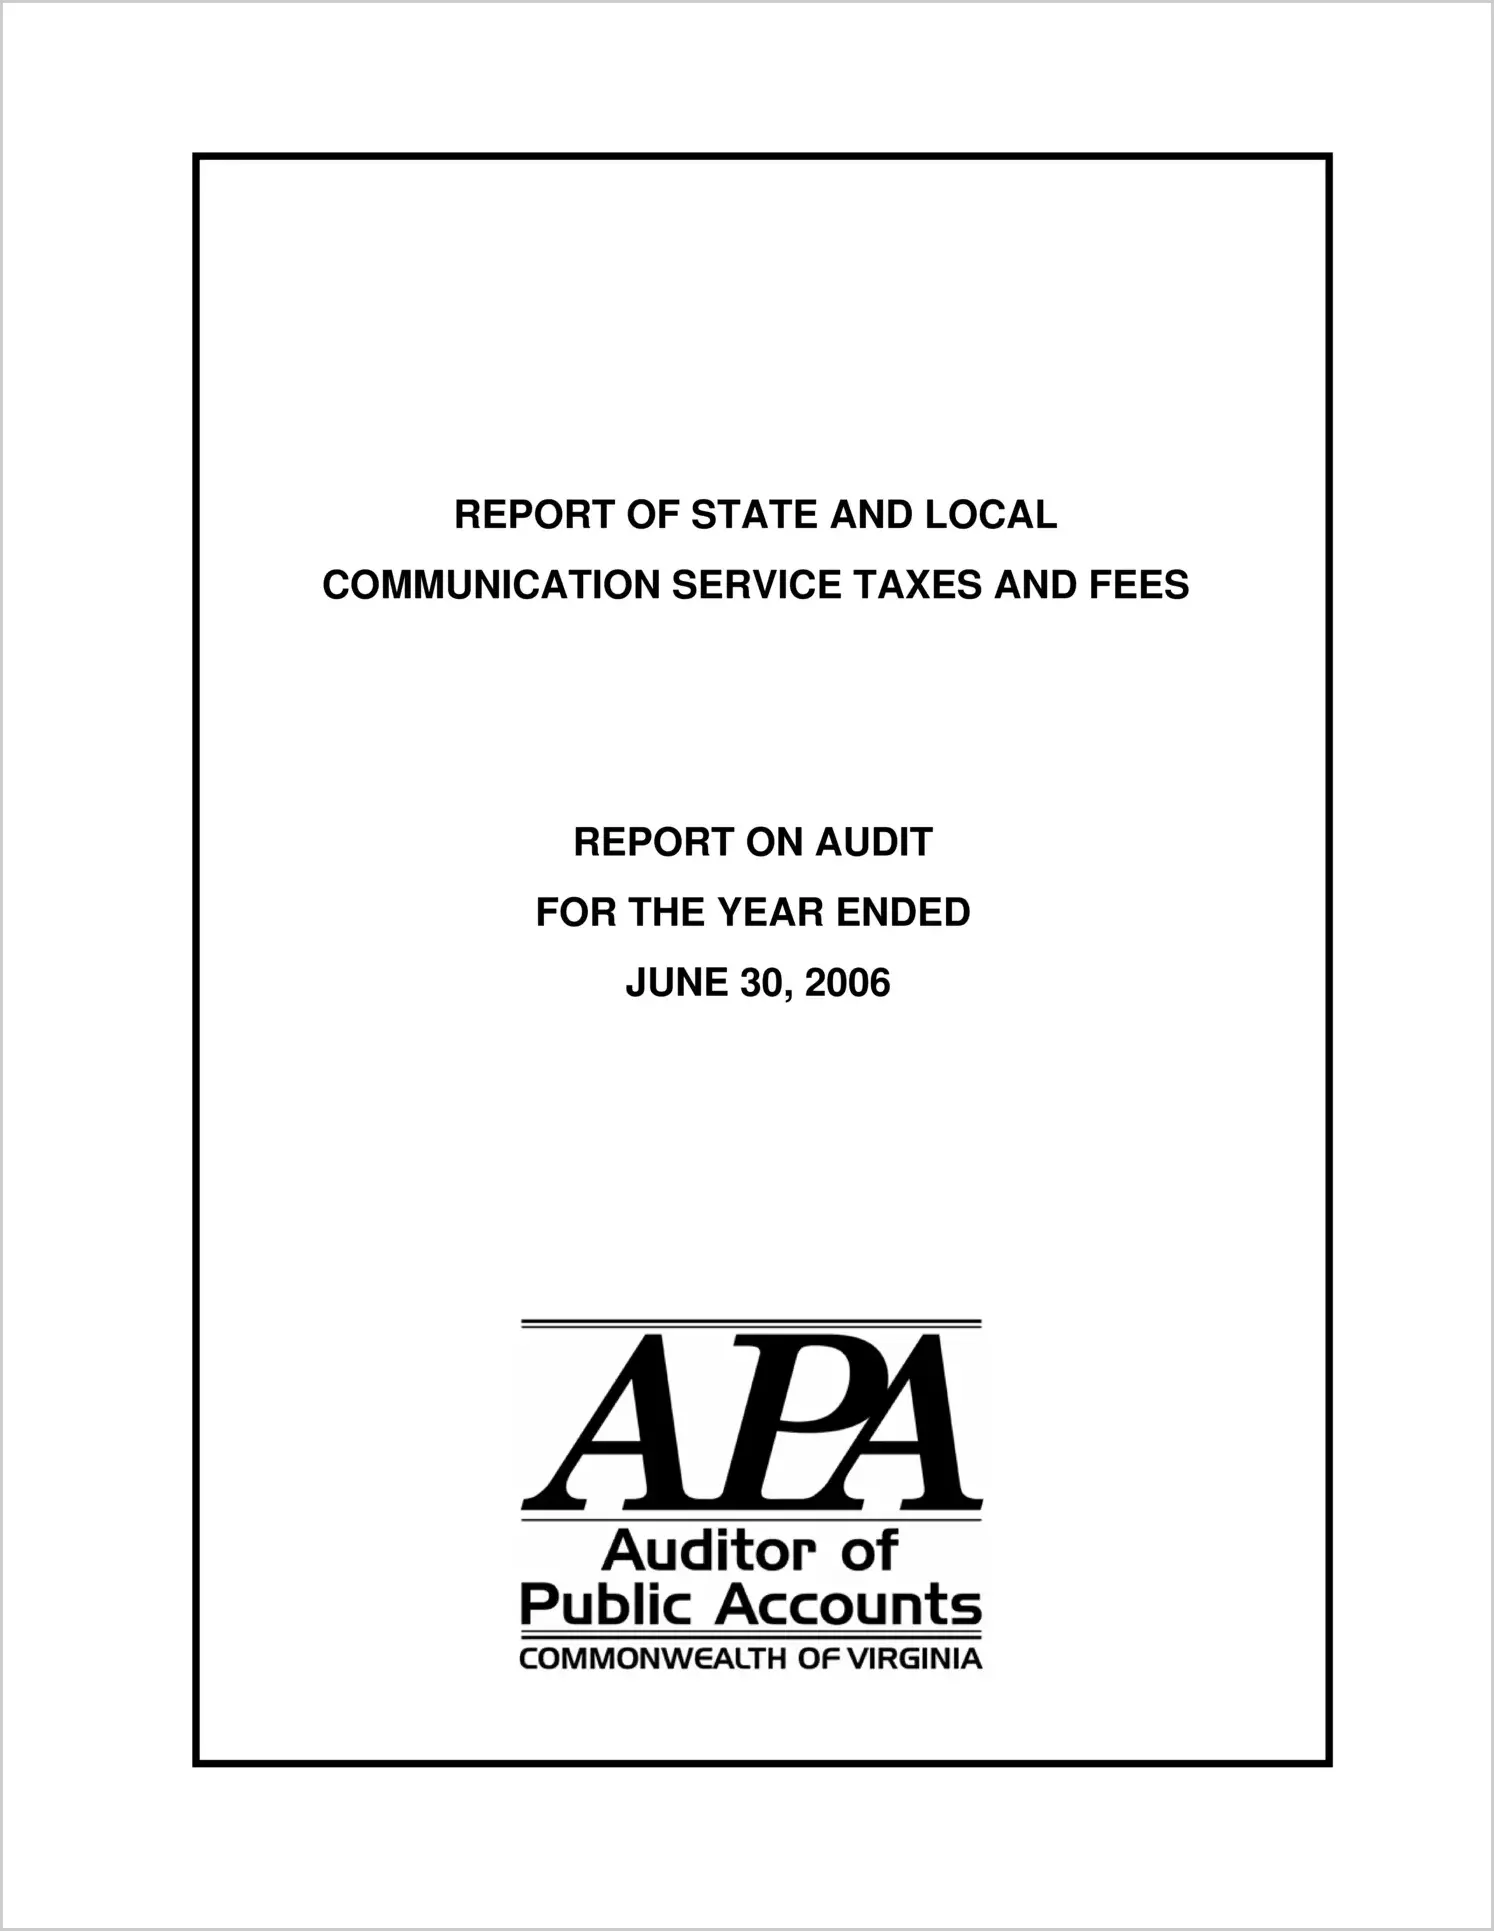 Report on State and Local Communication Service Taxes and Fees for the year ended June 30, 2006